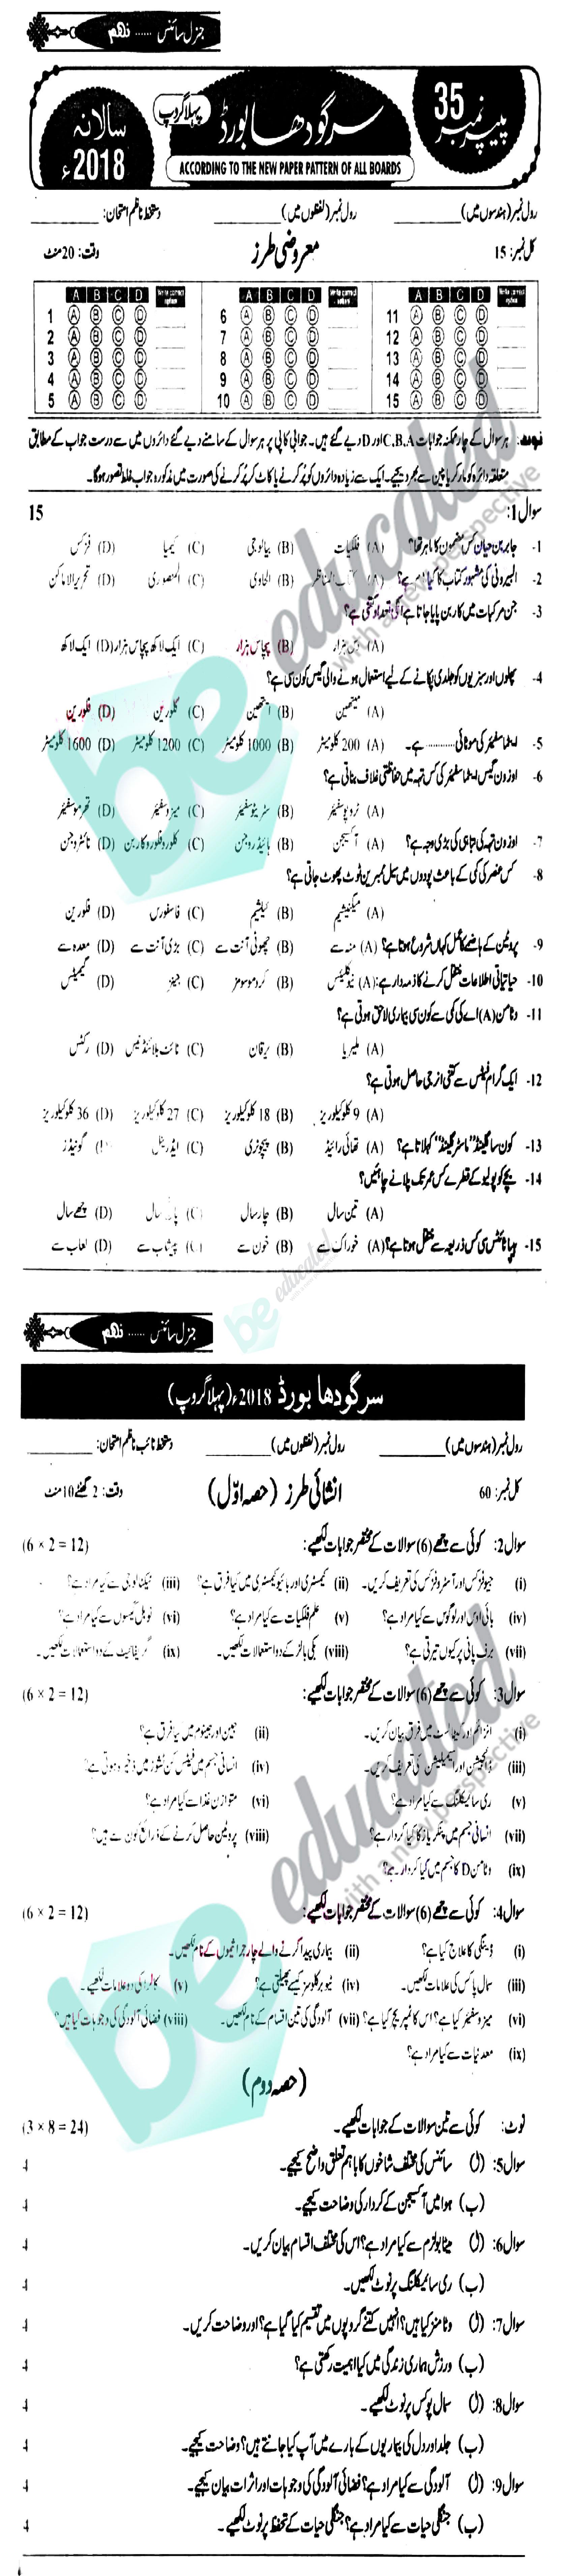 General Science 9th class Past Paper Group 1 BISE Sargodha 2018